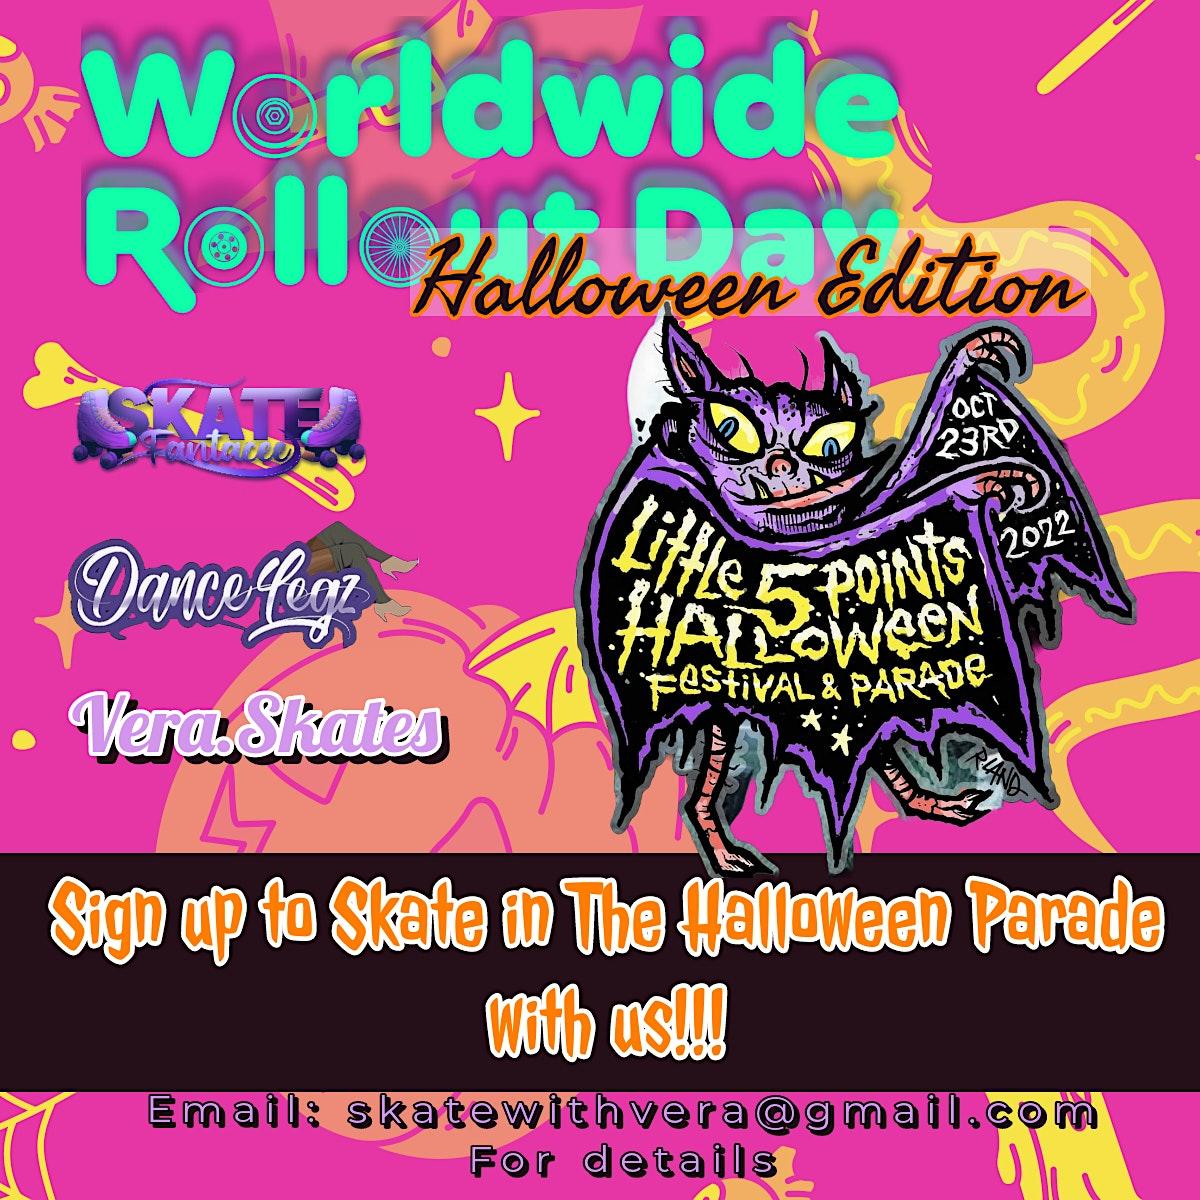 Rolling Group in Little Five Halloween Parade
Sun Oct 23, 12:00 PM - Sun Oct 23, 6:00 PM
in 3 days